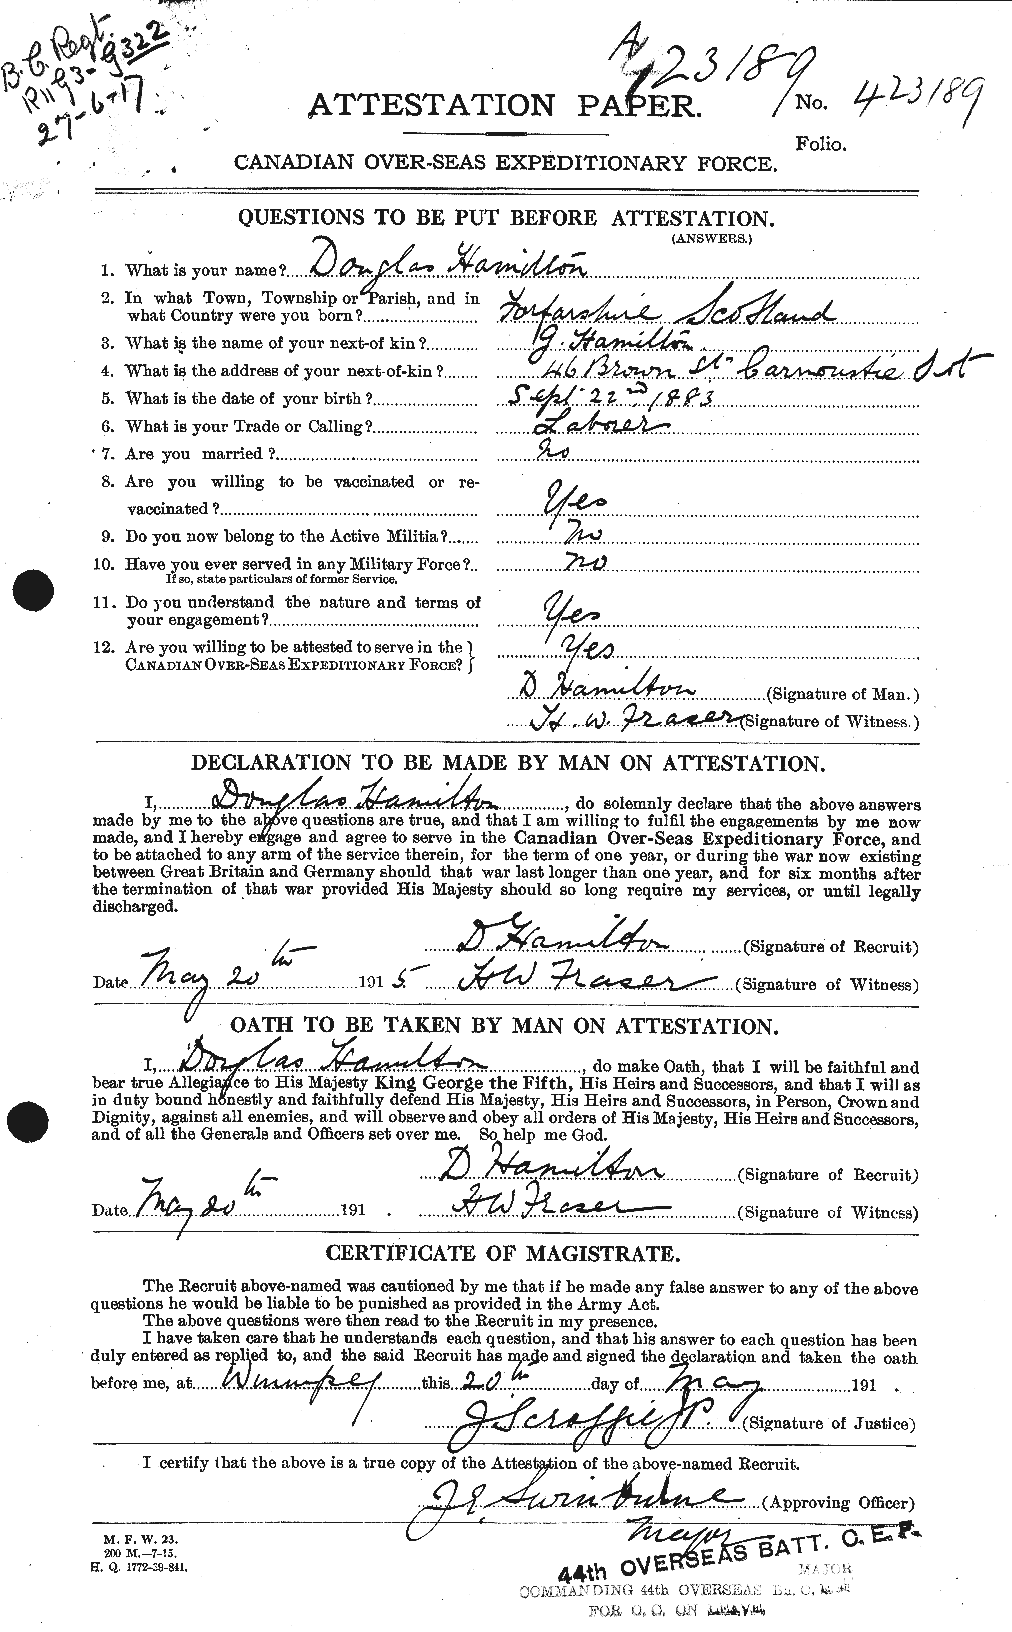 Personnel Records of the First World War - CEF 375362a